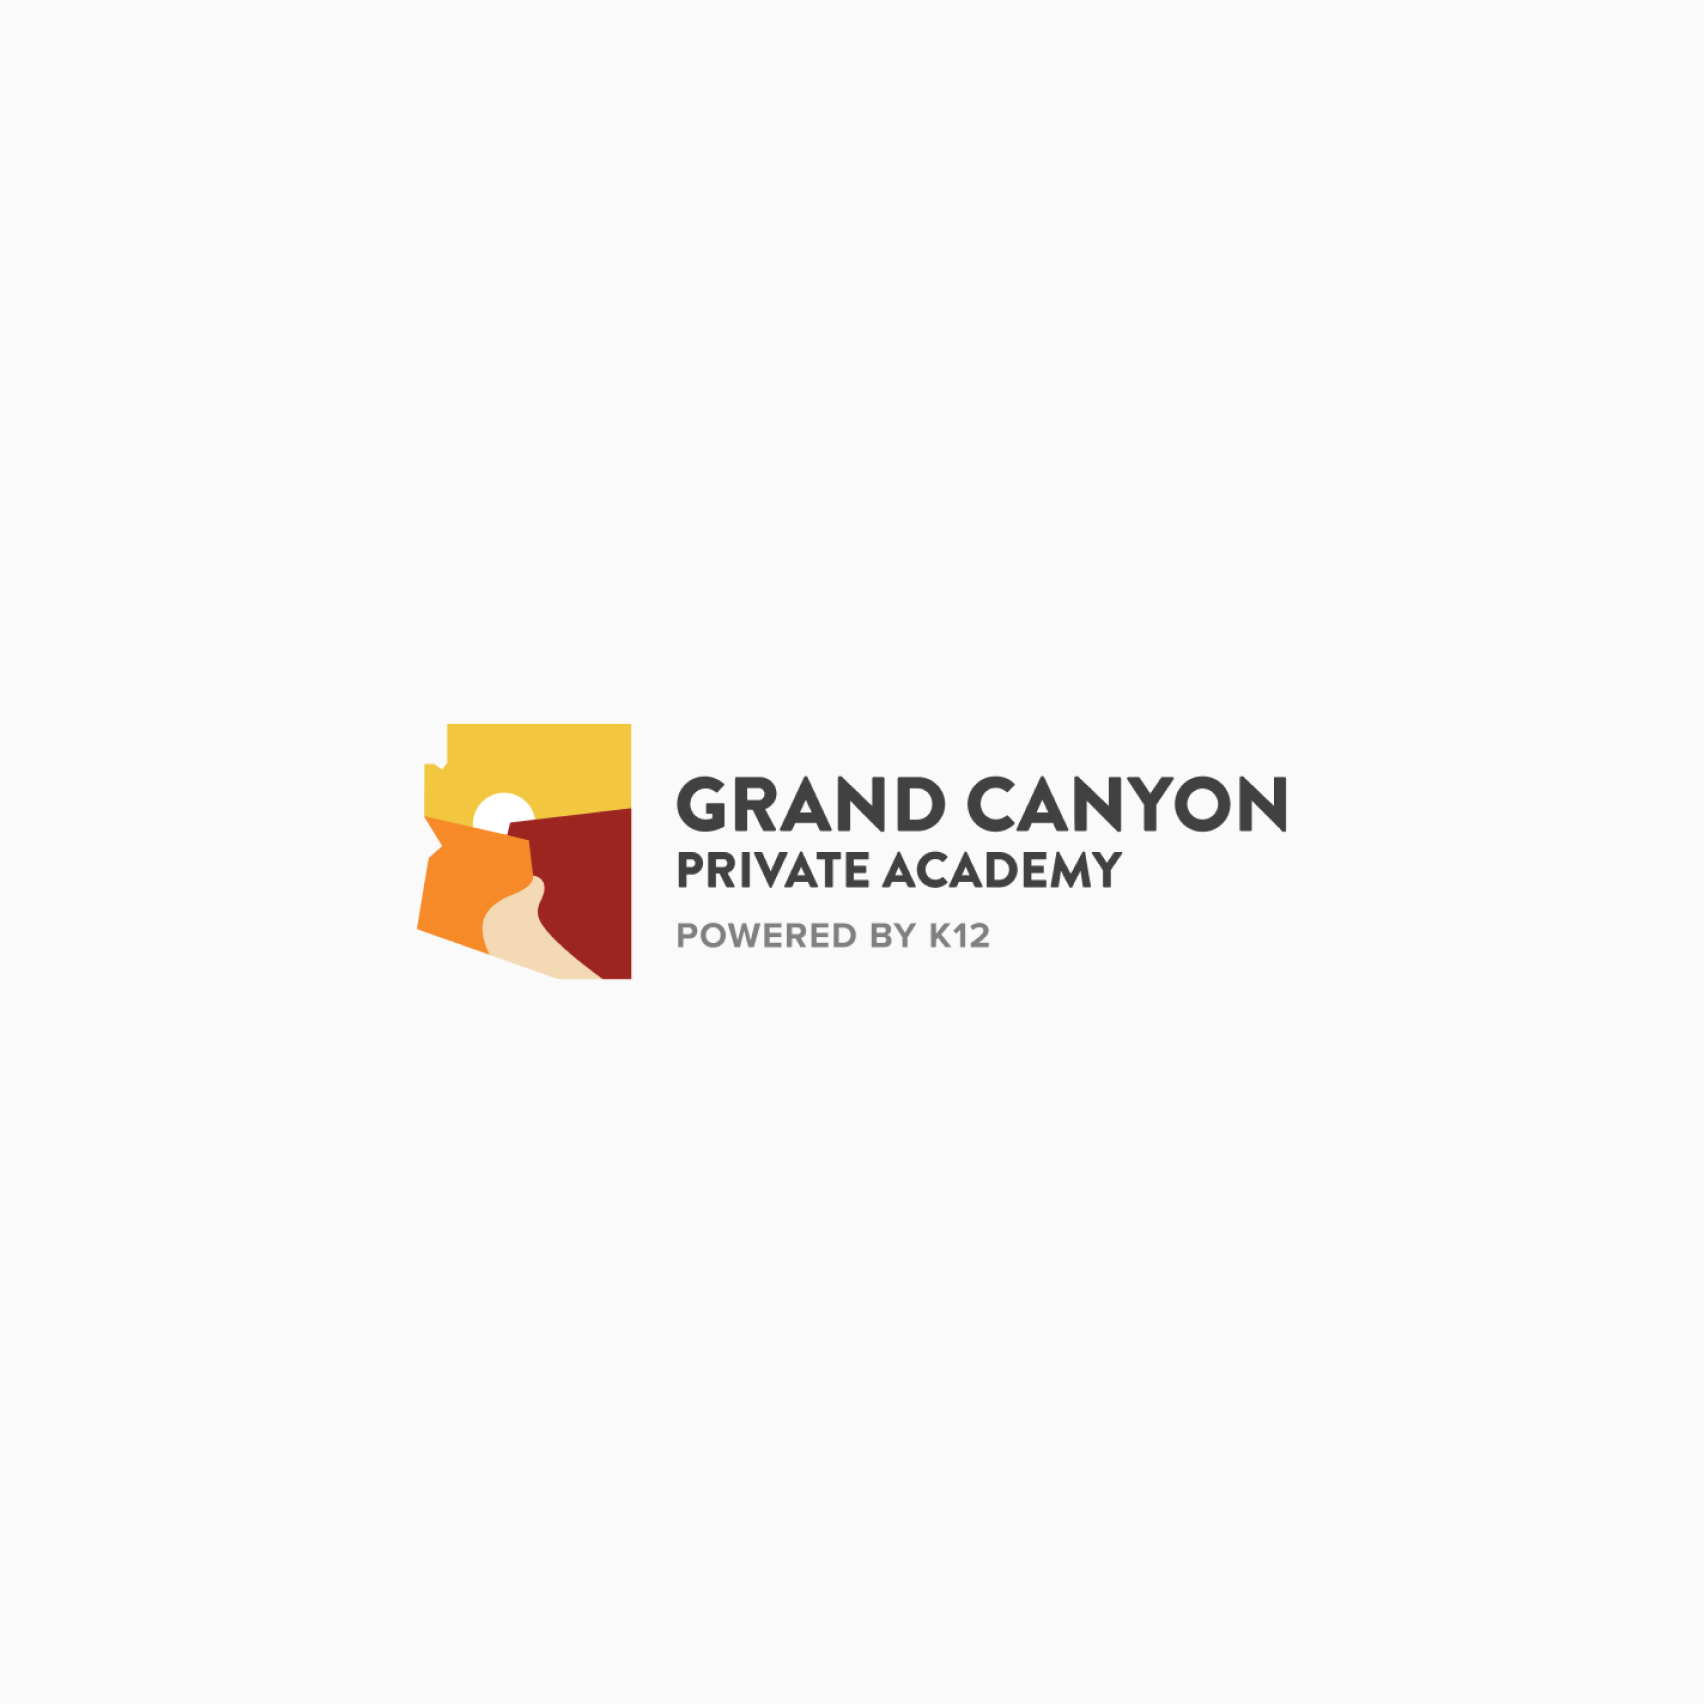 Online Private Schools image 13 (name Grand Canyon)